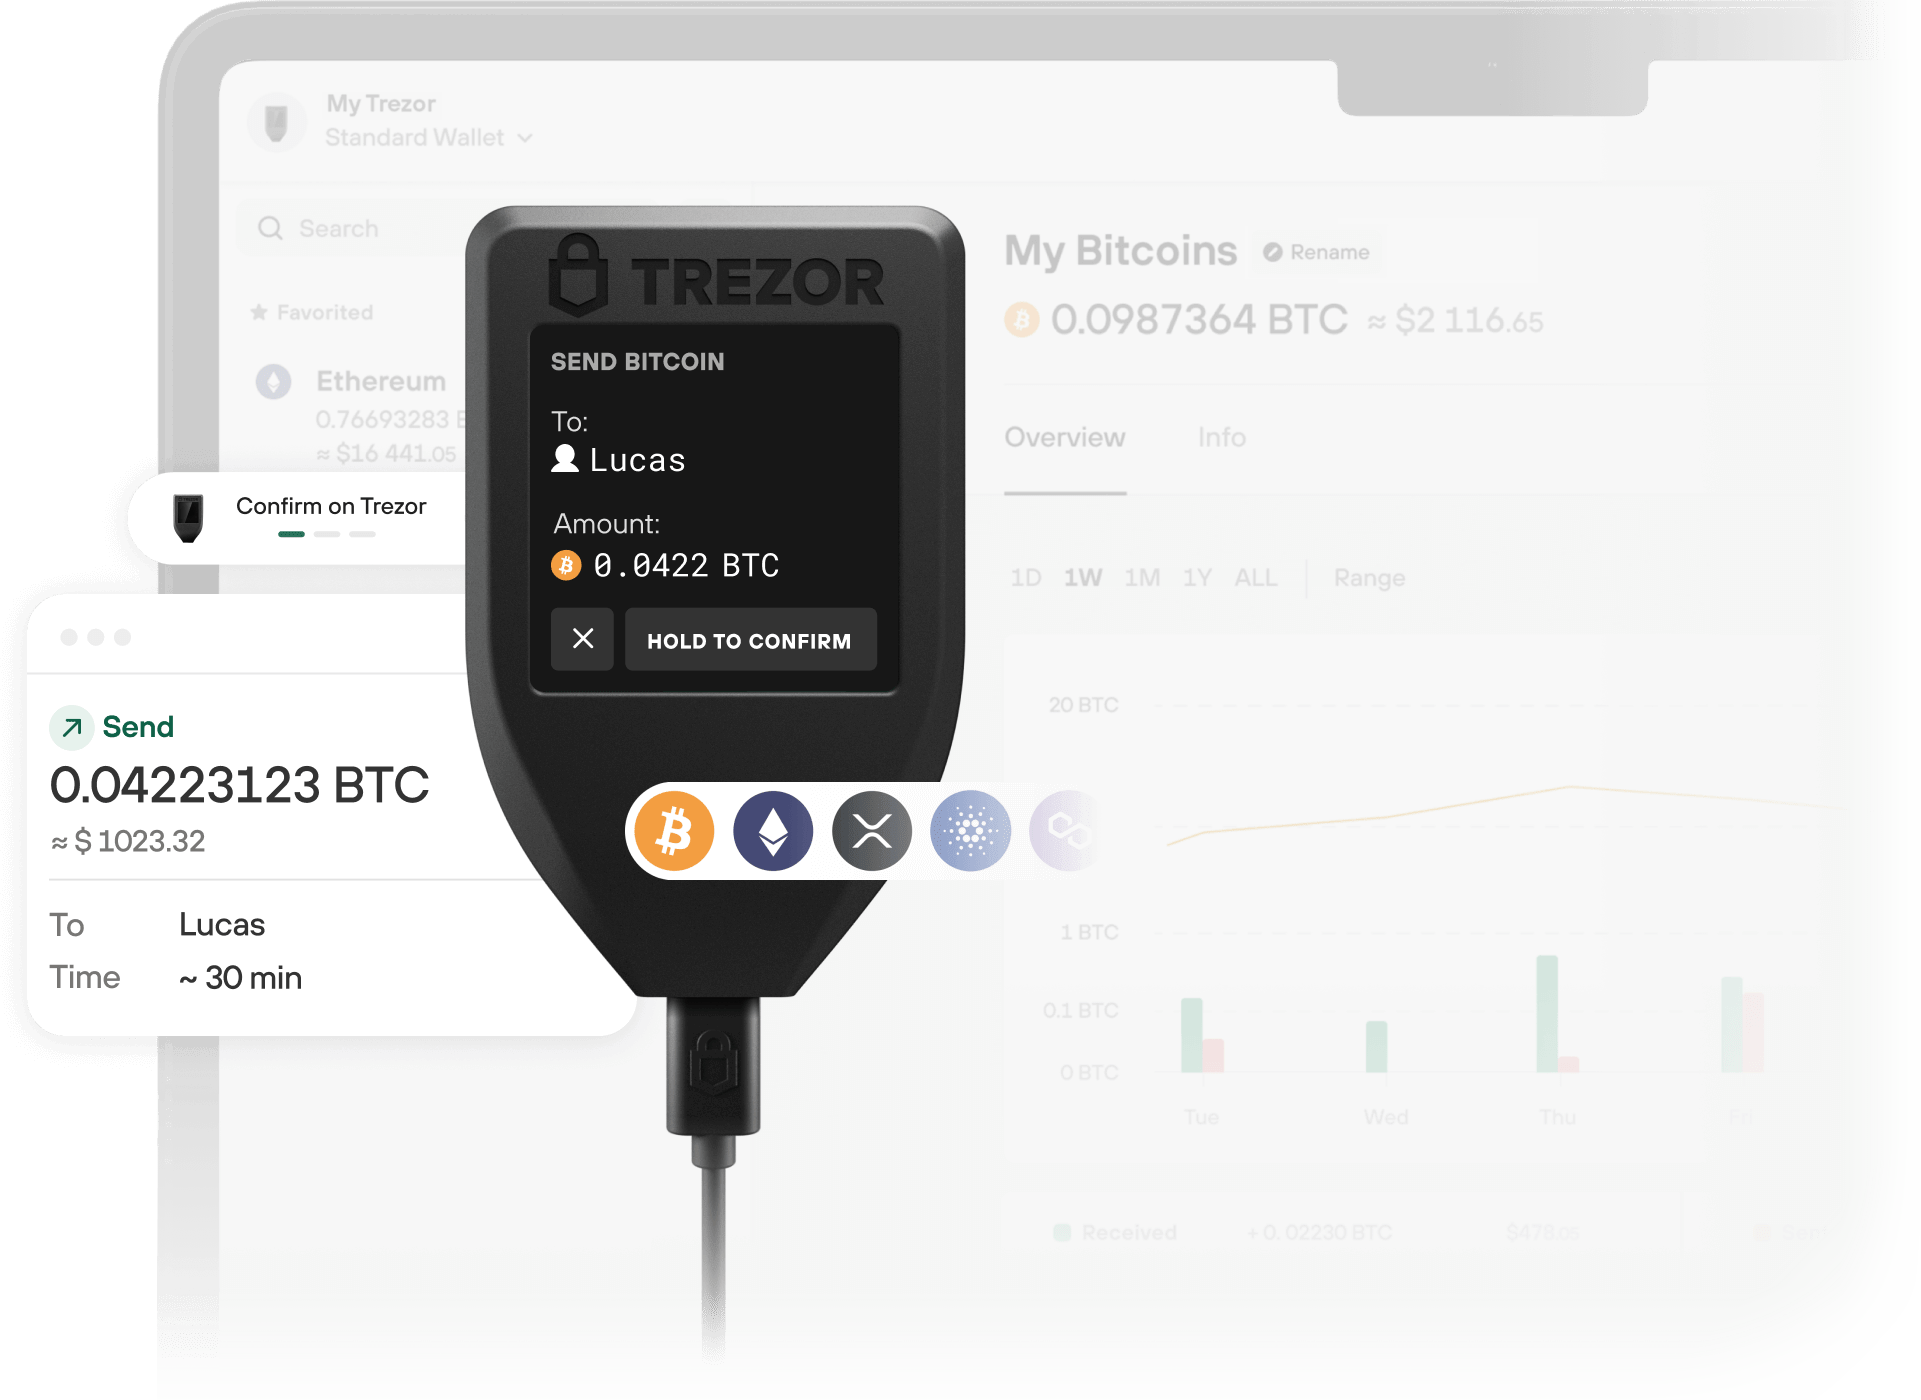 Trezor Hardware wallet with Bitcoin and wallet interface shown behind